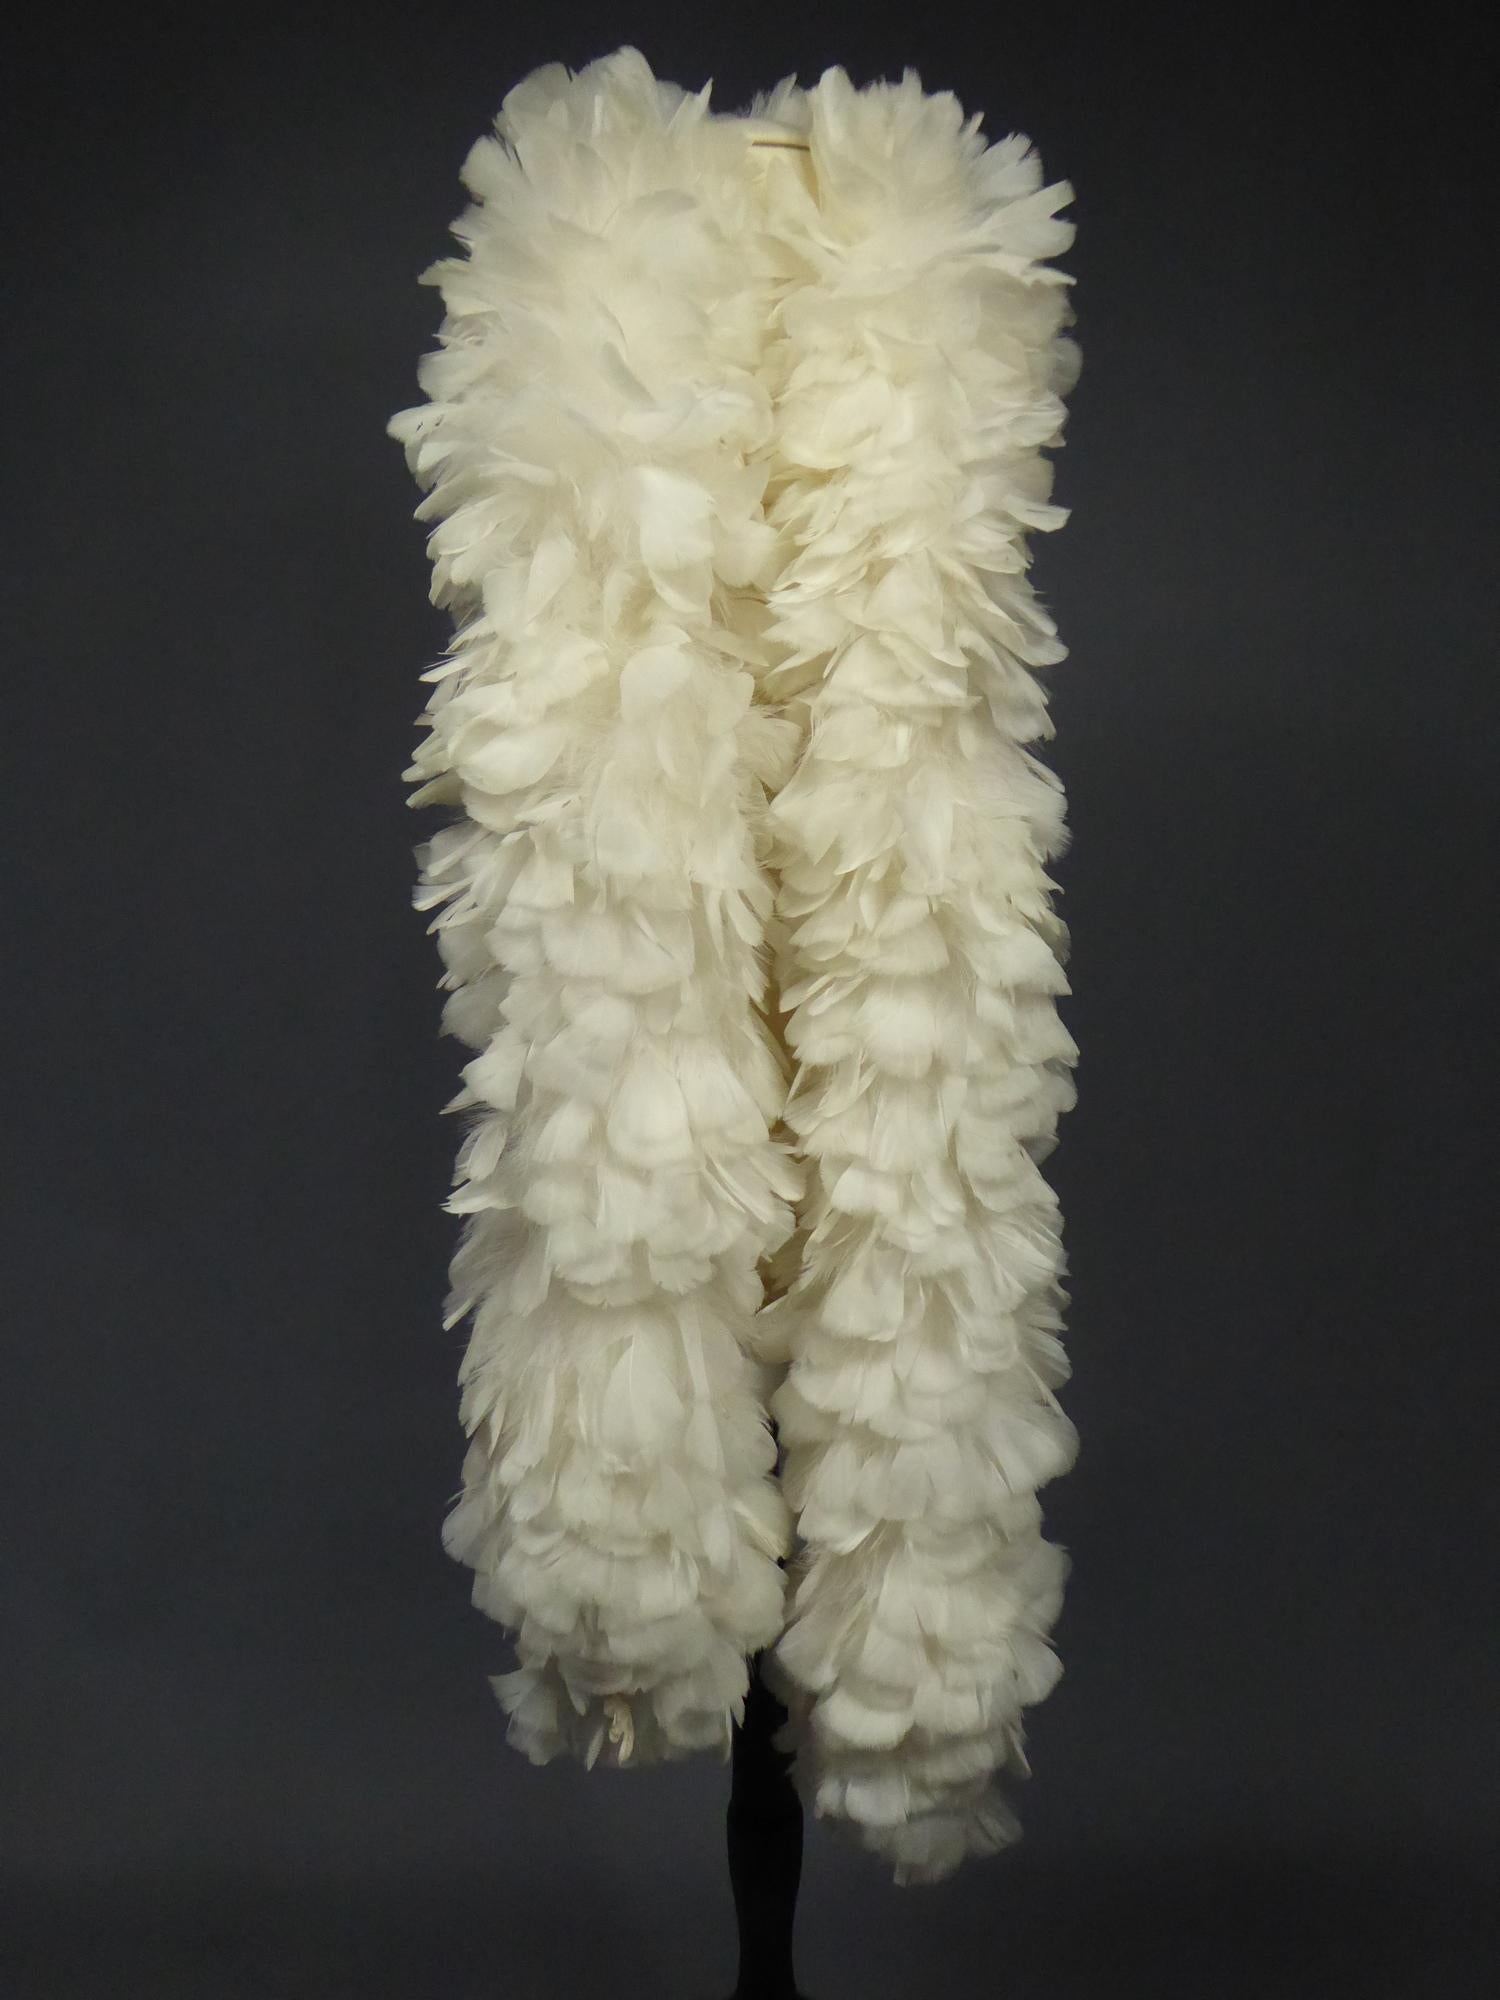 Circa 2000
France

Long boa stole in white cockerel feathers dating from the 2000s. Knotted inside assembly in fluff feathers and finished at each end with a small braided cotton rope. No tasks, very clean, very solid feathers structure. Very good